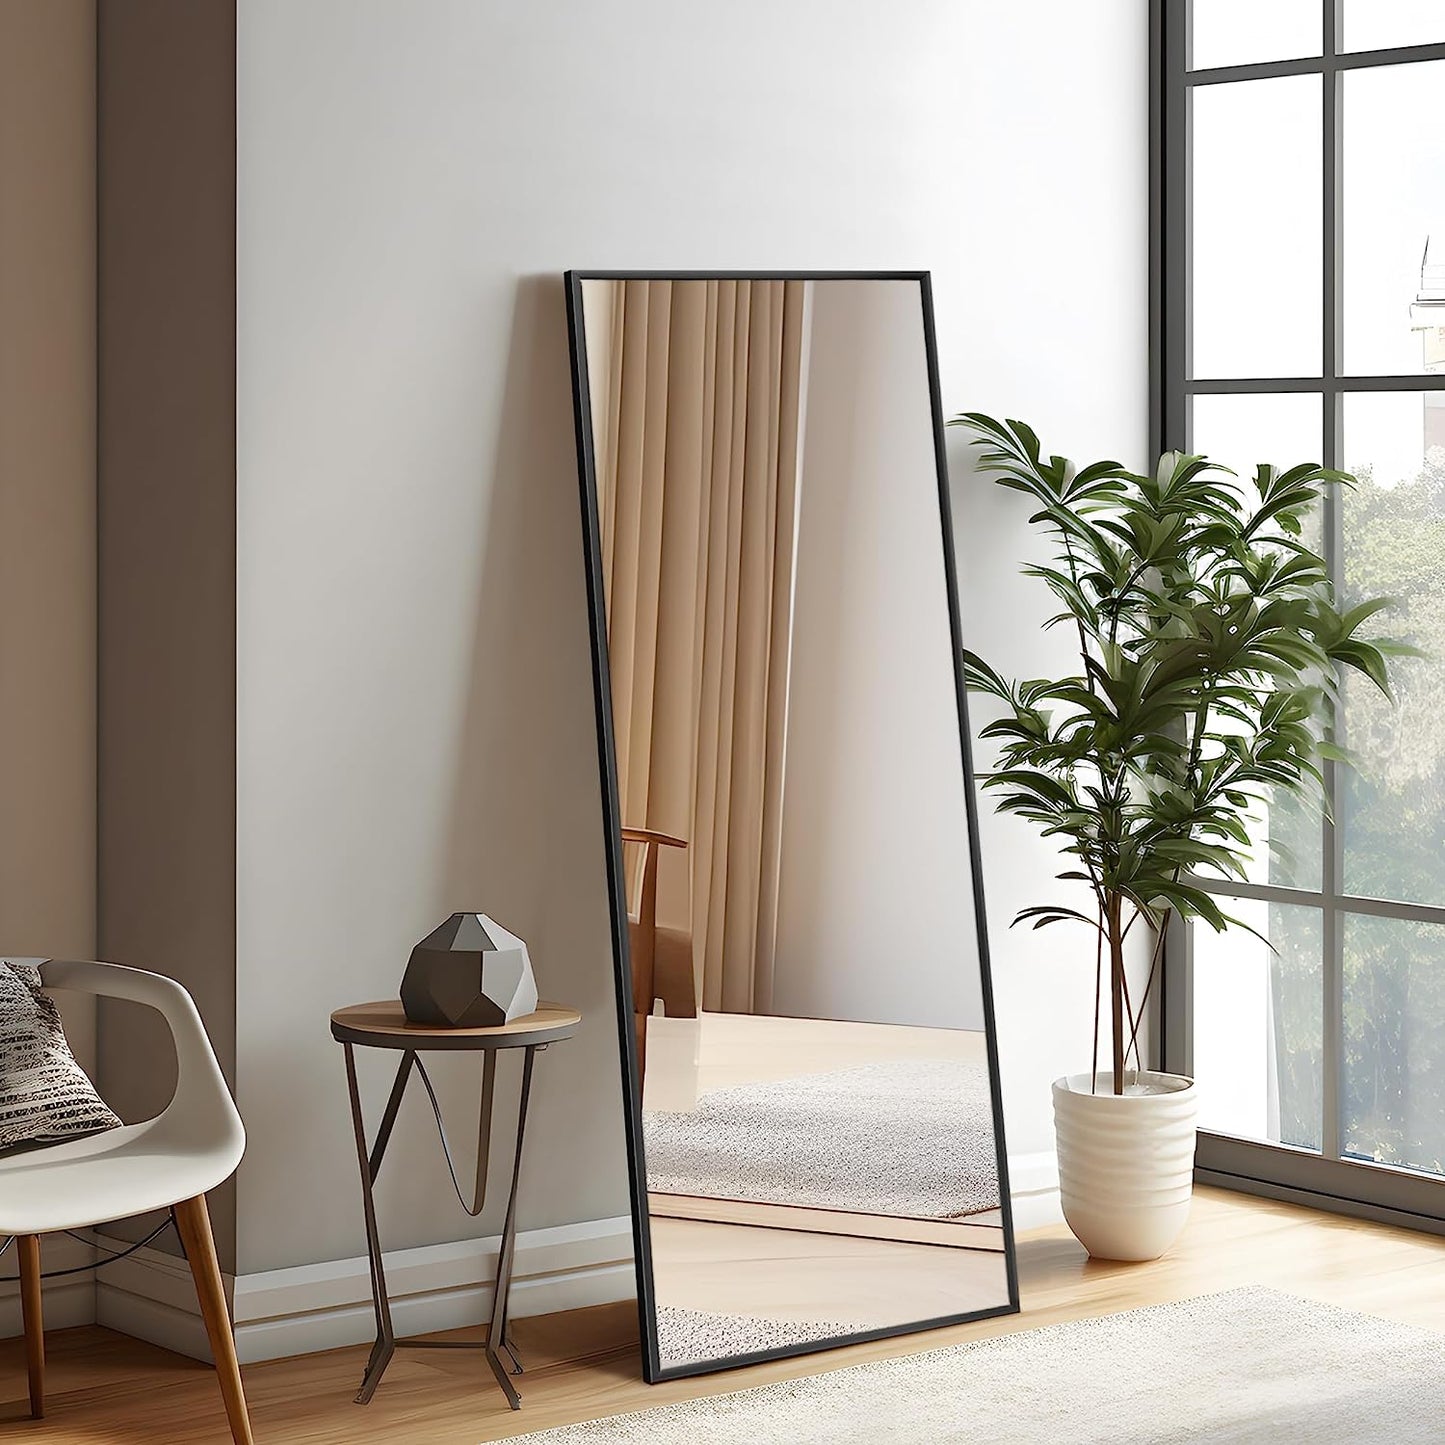 Full Length Floor Mirror 43"x16" Large Rectangle Wall Mirror Hanging or Leaning Against Wall for Bedroom, Dressing and Wall-Mounted Thin Frame Mirror - Black